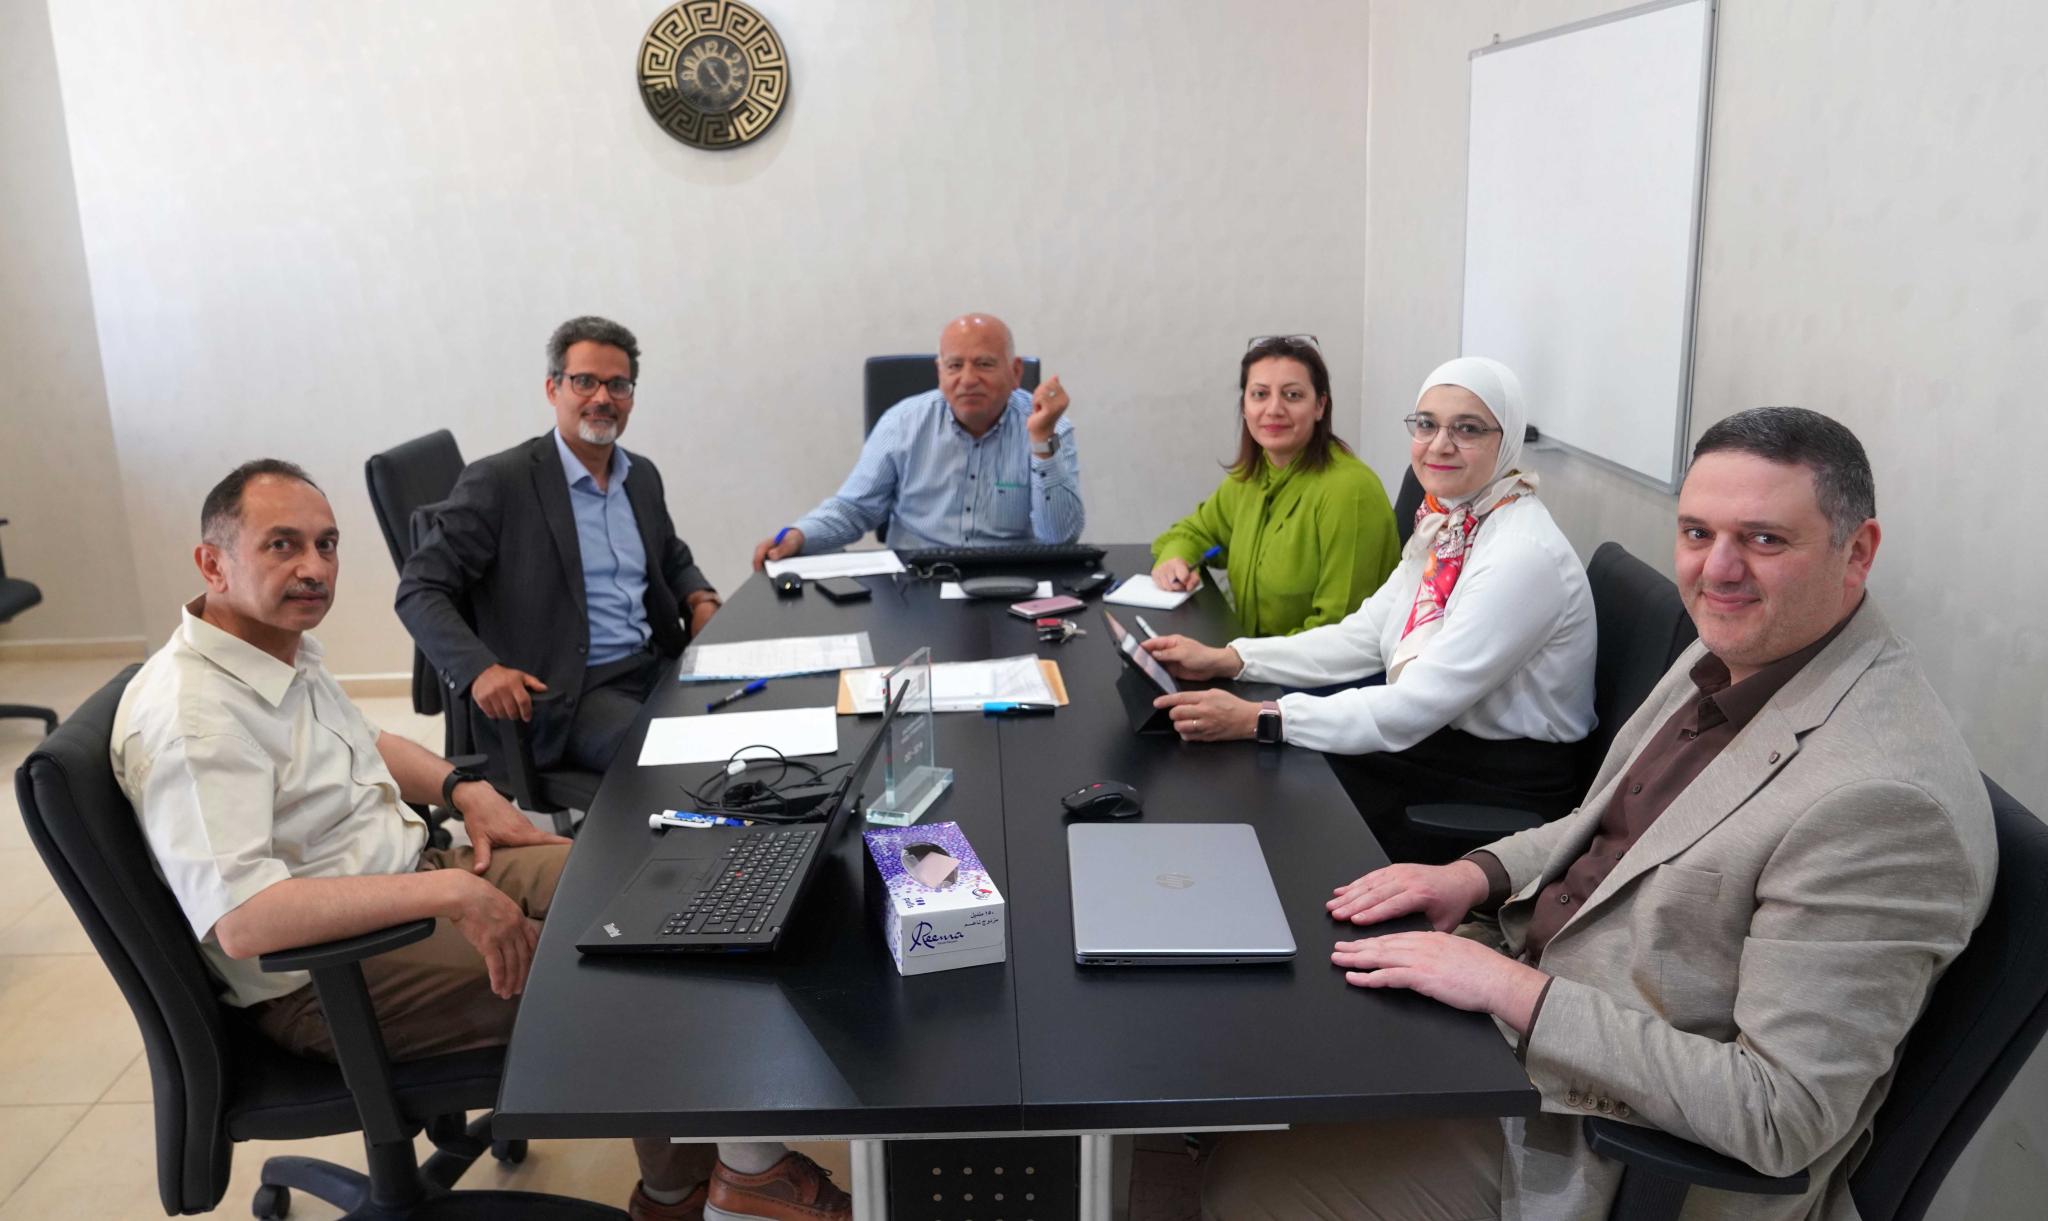 The Director of Erasmus Office in Palestine Visits AAUP